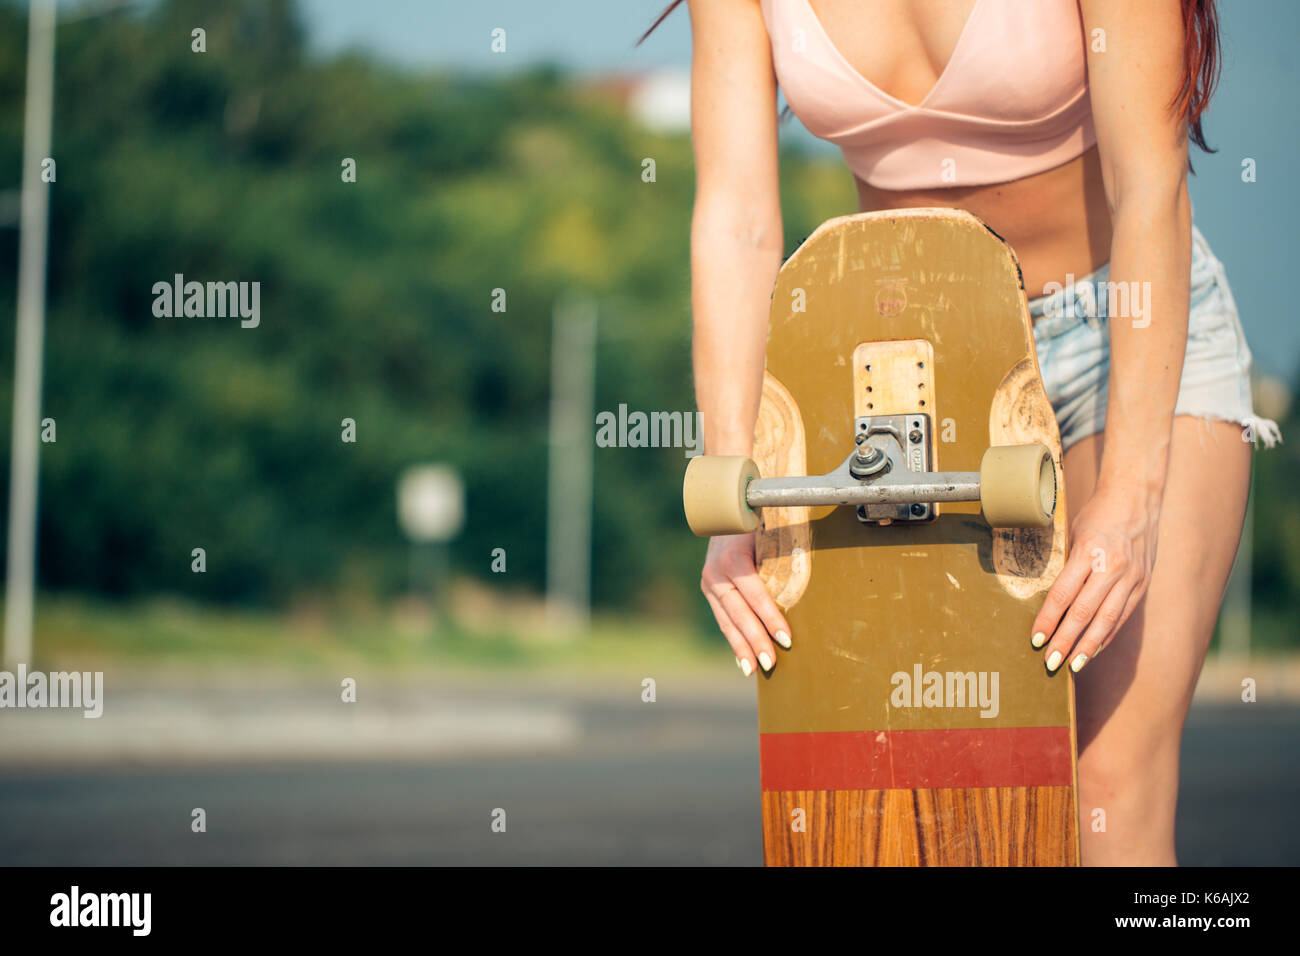 acticity and summer holiday concept - close up of female hand holding skateboard. Stock Photo